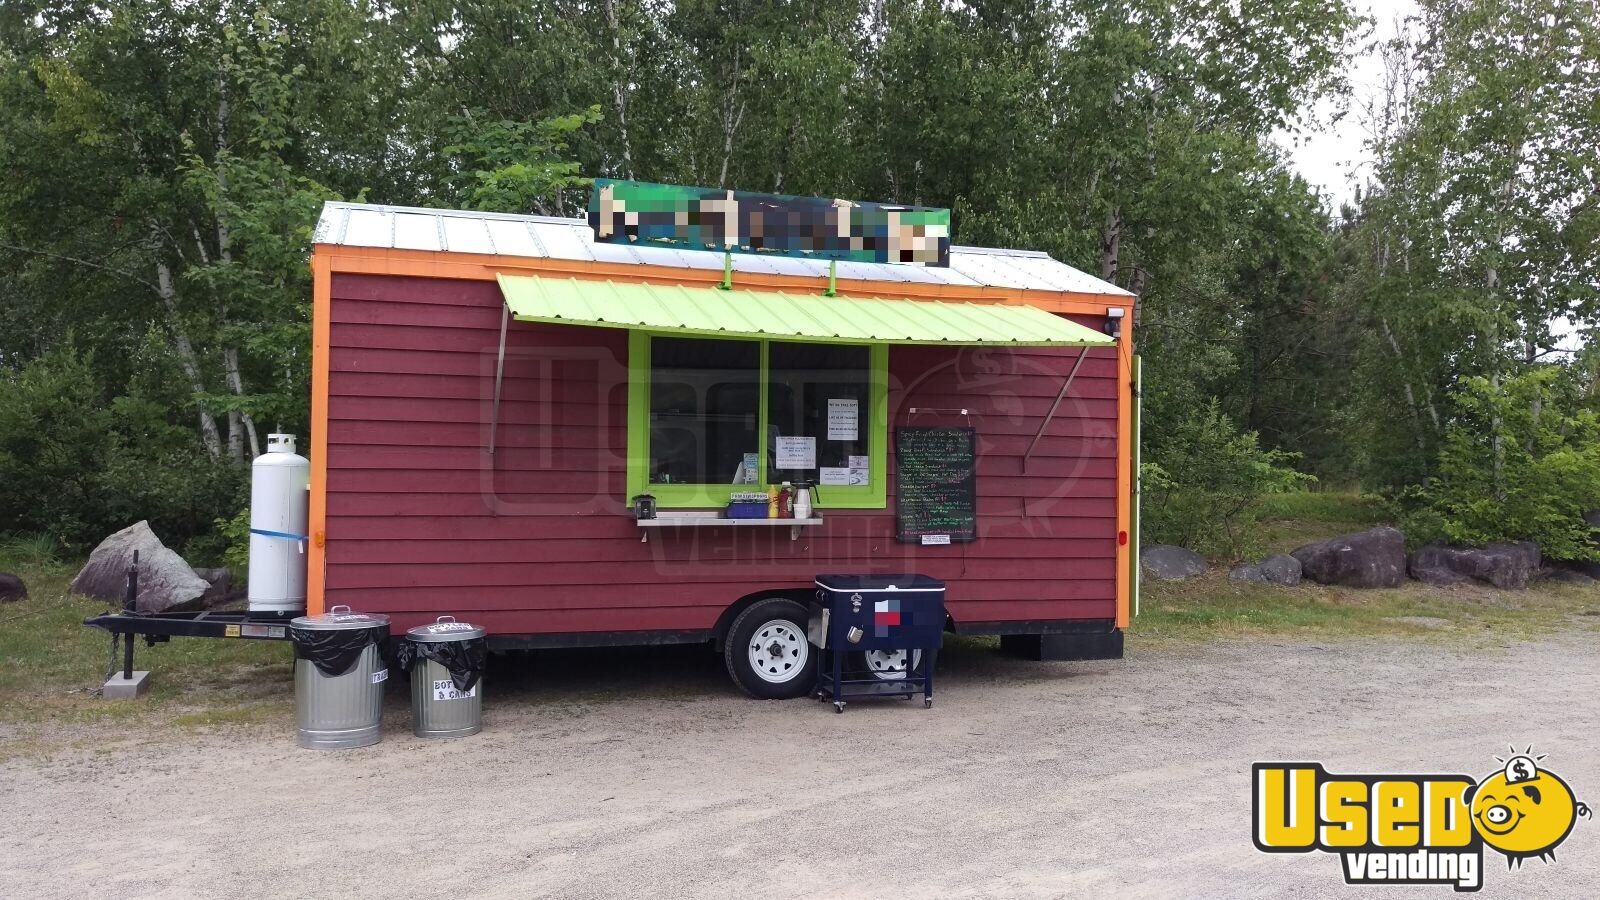 18 Used Mobile Kitchen Food Concession Trailer For Sale In Maine